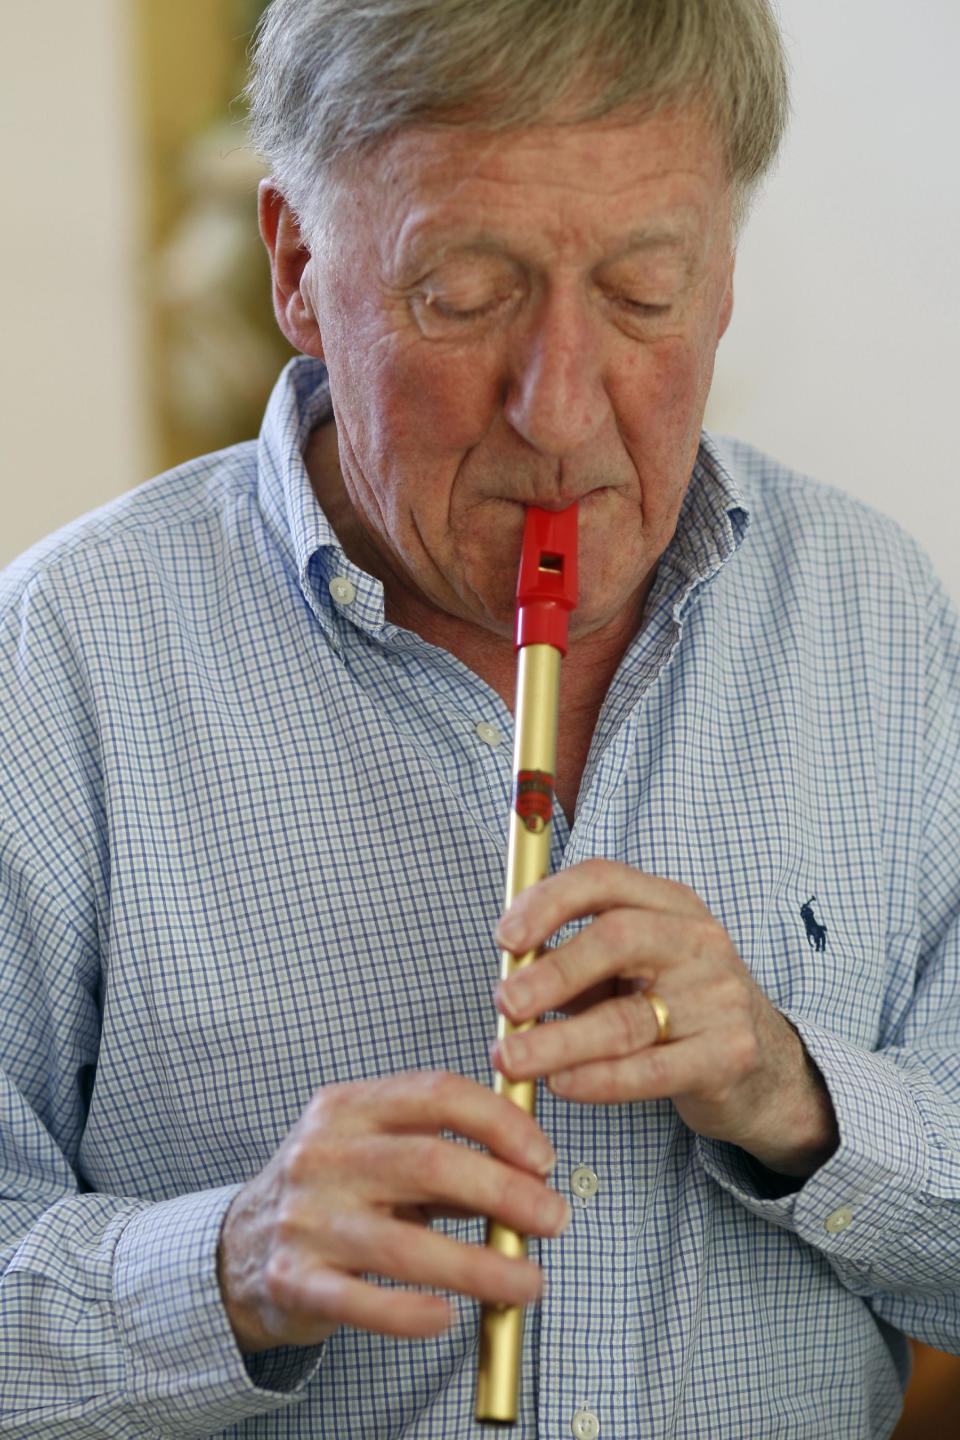 In this April 2, 2012 photo, Irish musician Paddy Moloney of the Chieftains, plays a tin whistle at his home in Naples, Fla. Moloney collaborates with musicians, Bon Iver, the Pistol Annies, the Civil Wars, the Secret Sisters, the Carolina Chocolate Drops on The Chieftains' 50th anniversary album, "Voice of Ages." (AP Photo/Lynne Sladky)